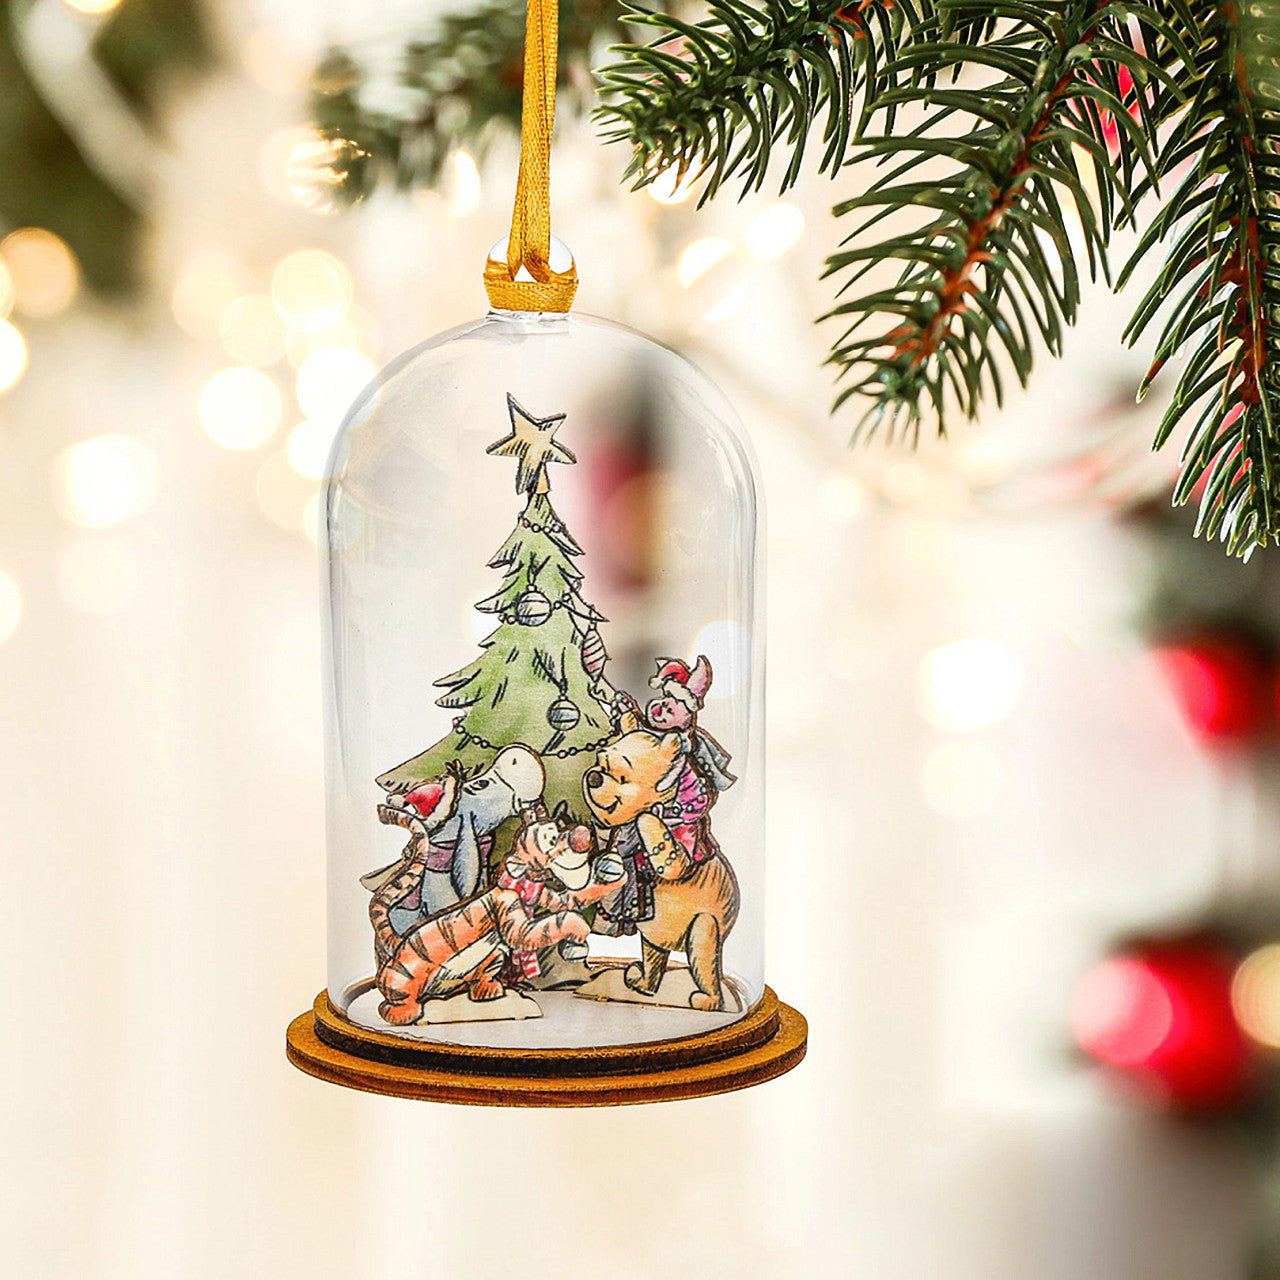 Altogether at Christmas - Winnie The Pooh, Piglet & Eeyore Hanging Ornament